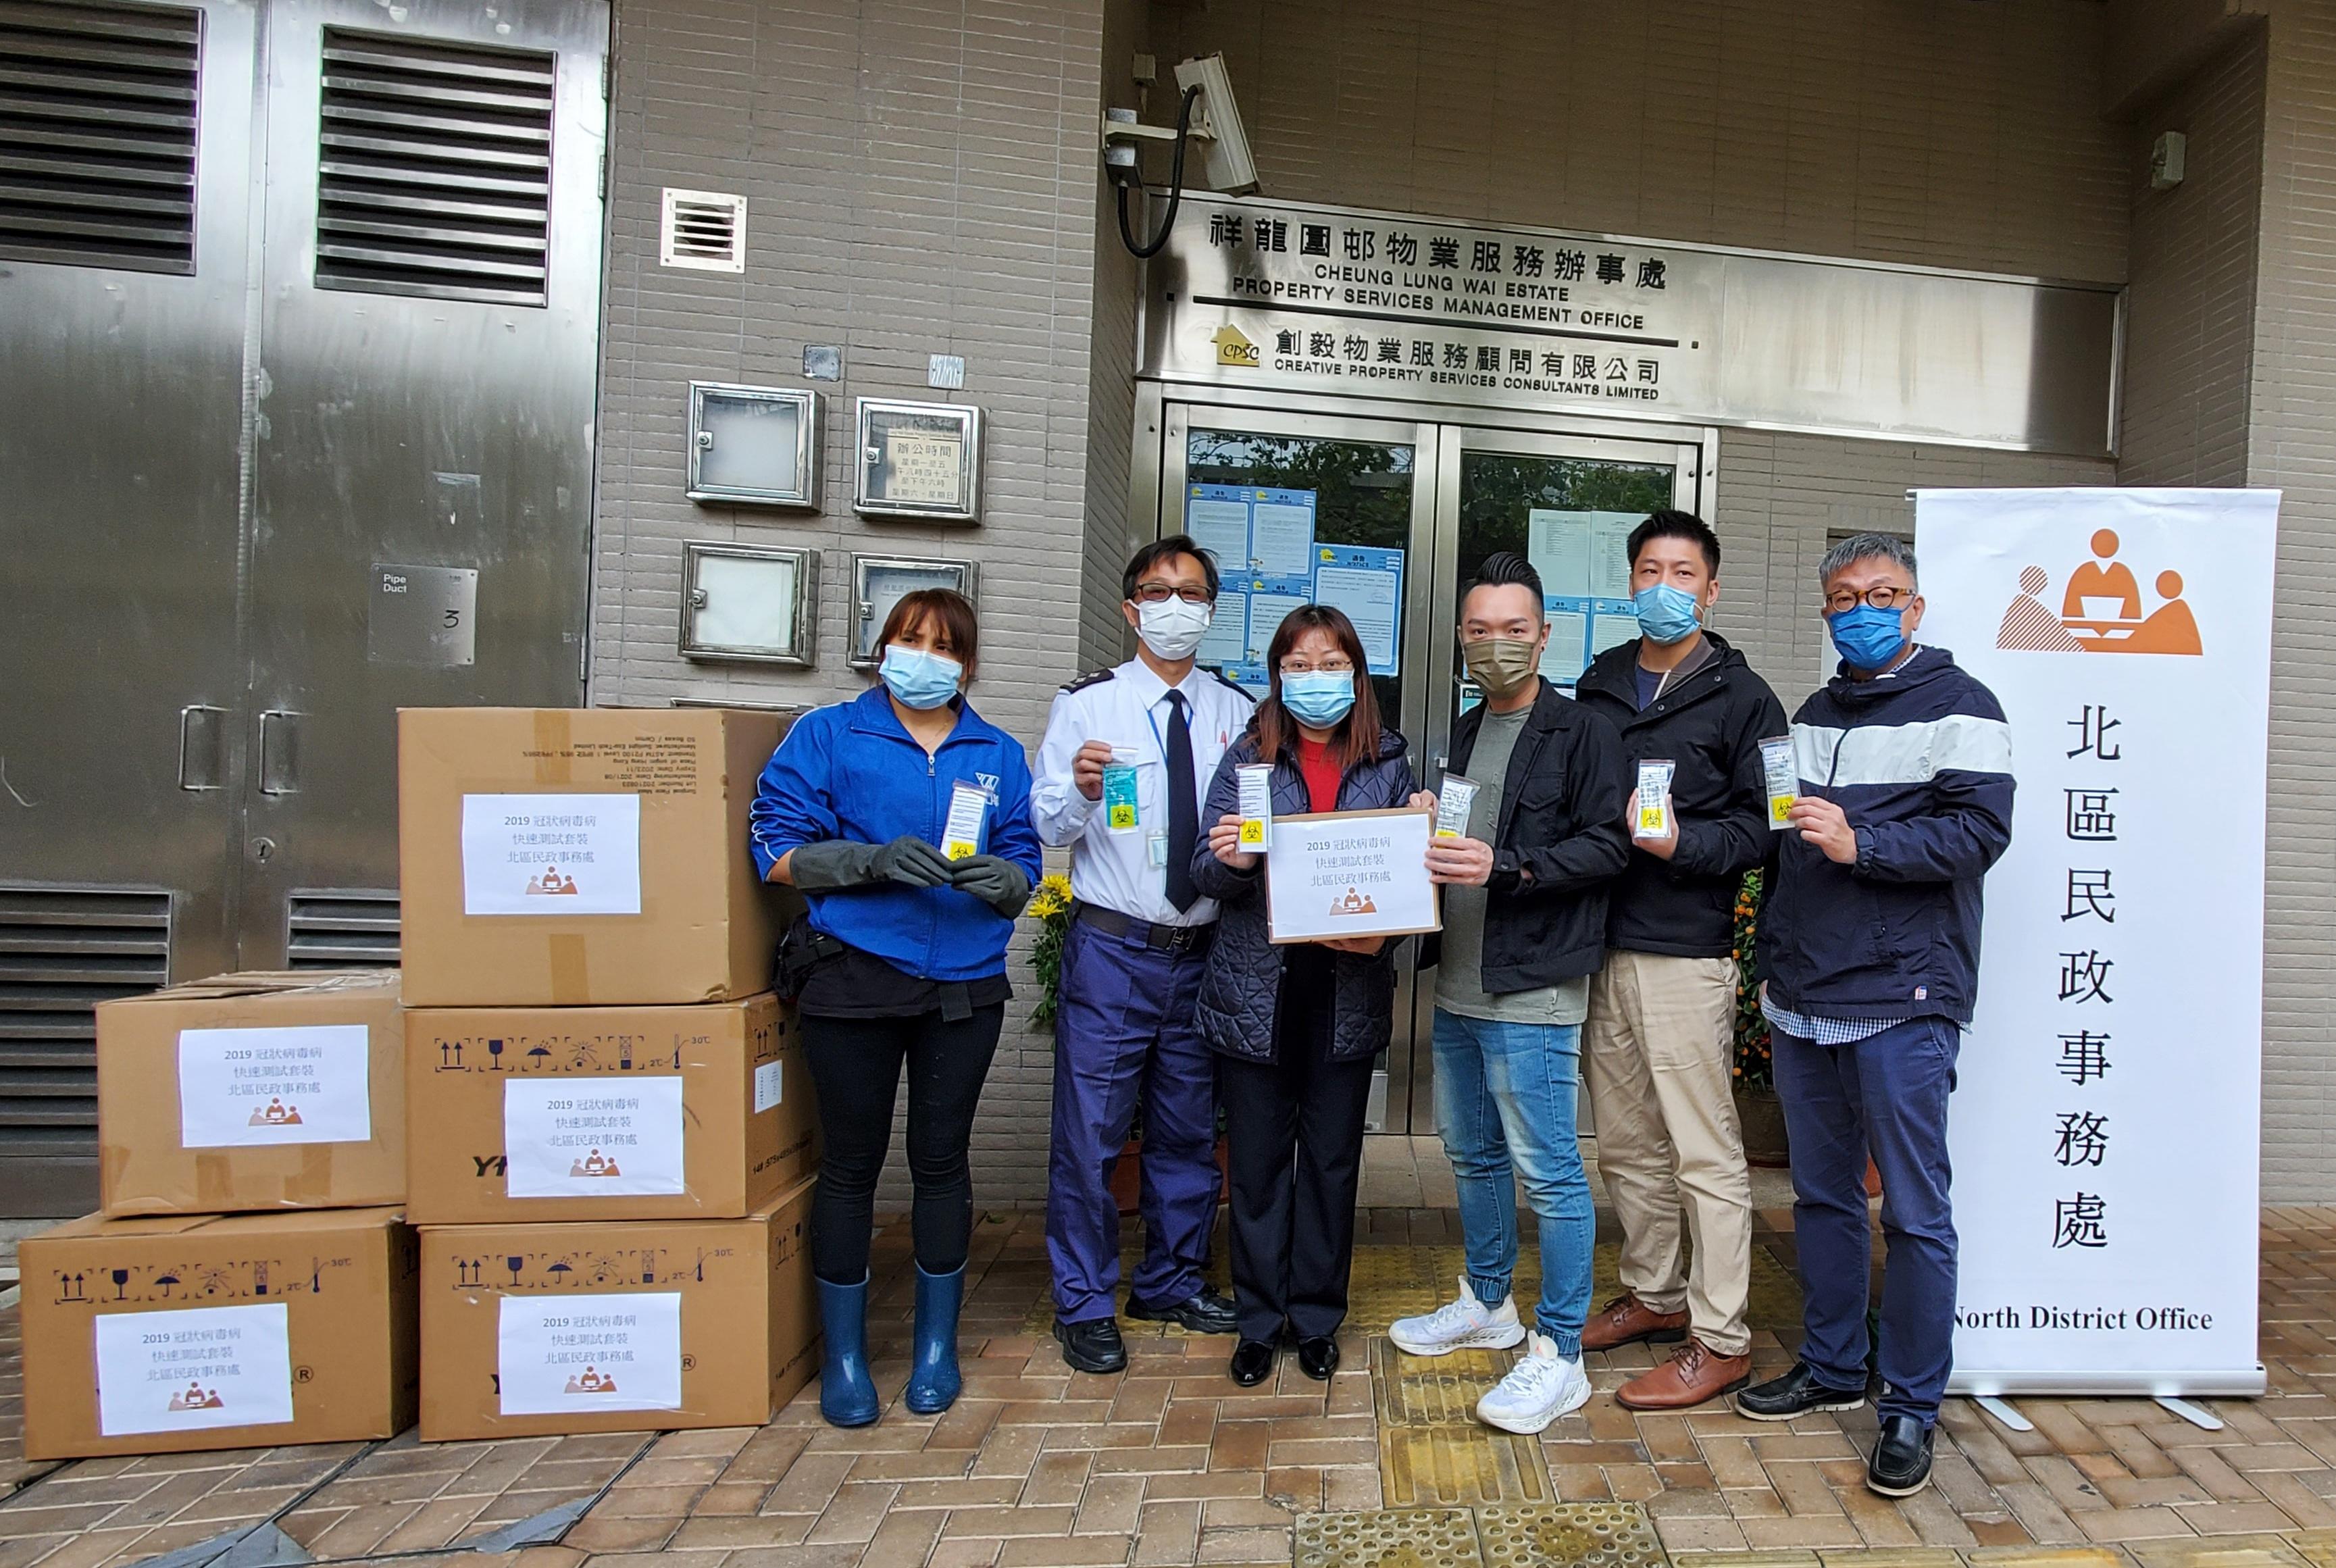 The North District Office today (February 12) distributed rapid test kits to households, cleansing workers and property management staff living and working in Ching Cheung House and King Cheung House for voluntary testing through the property services management office of Cheung Lung Wai Estate.